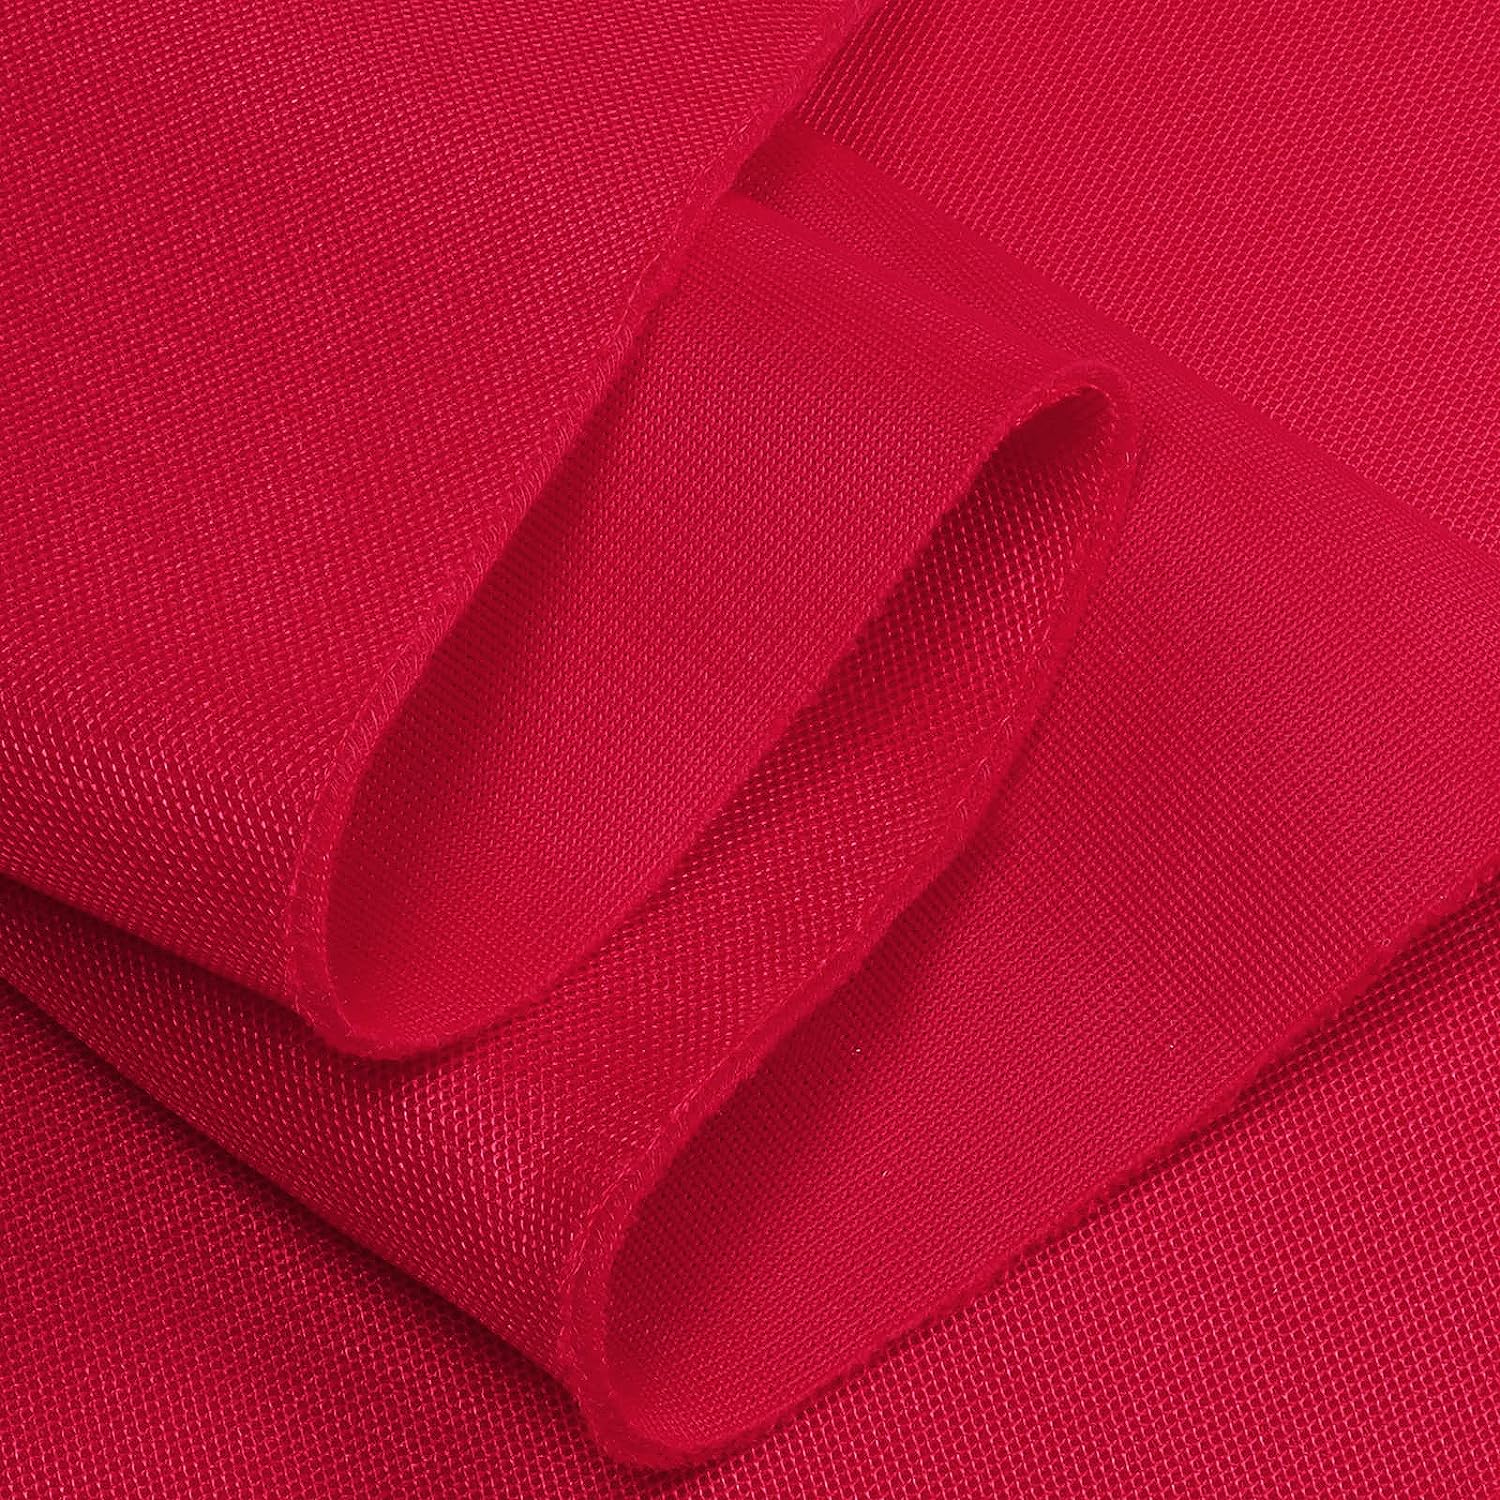 Air Mesh Fabric Red buying